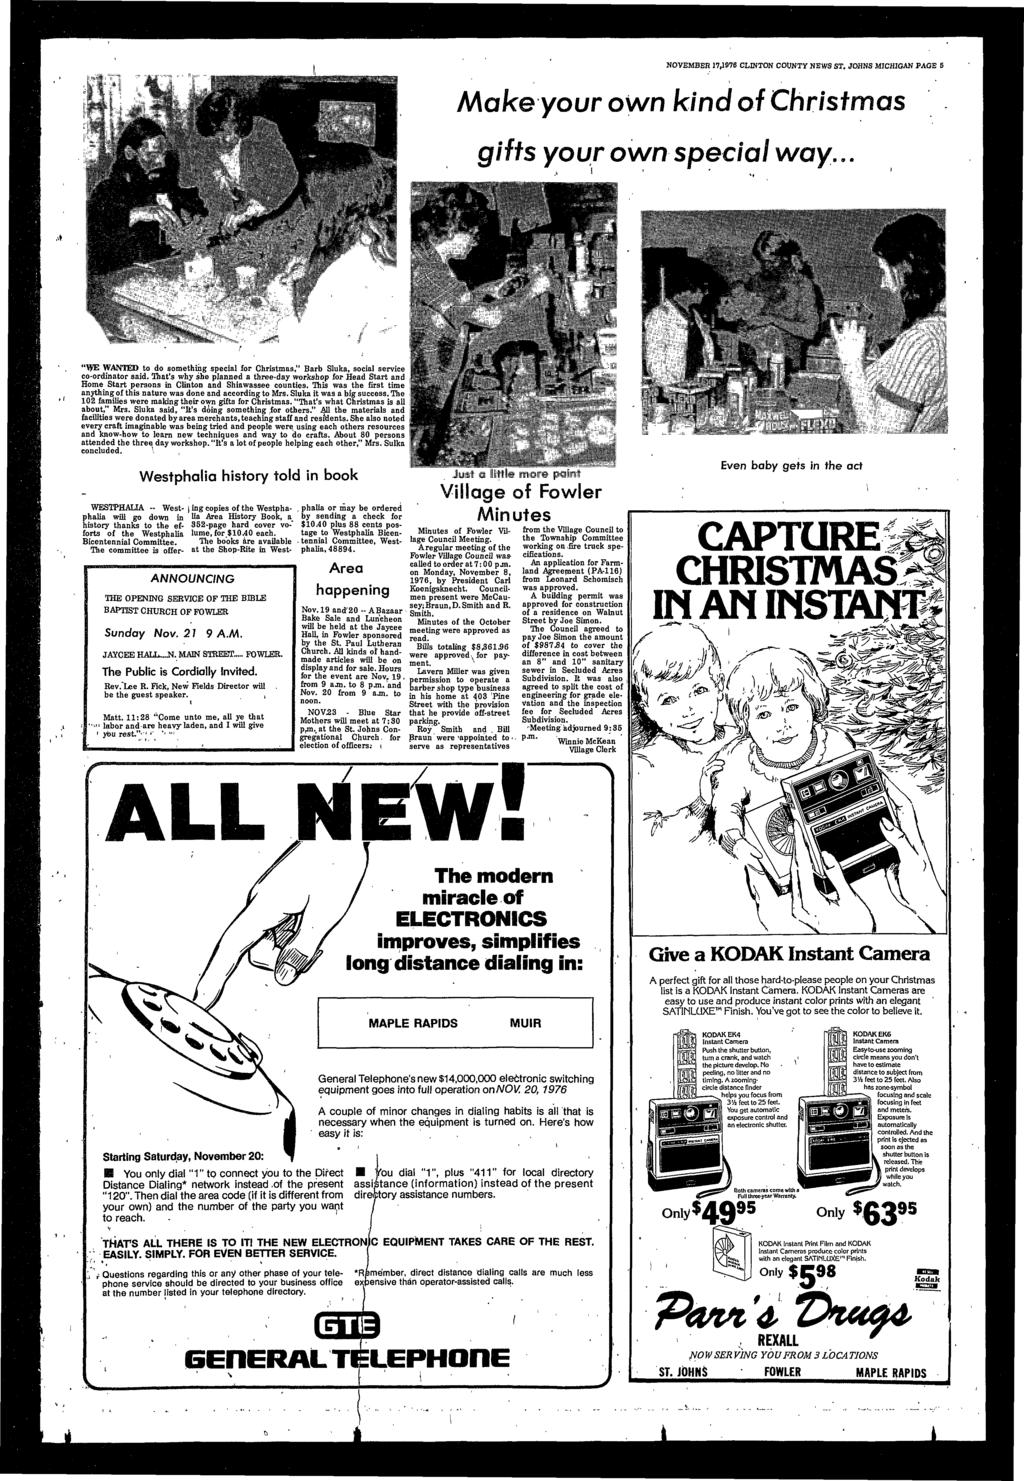 NOVEMBER 17,1976 CLINTON COUNTY NEWS ST. JOHNS MICHIGAN PAGE 5 Make your own knd of Chrstmas your owns way... "YVE WANTED to do somethng specal for Chrstmas," Barb Sluka, socal servce co-ordnator sad.